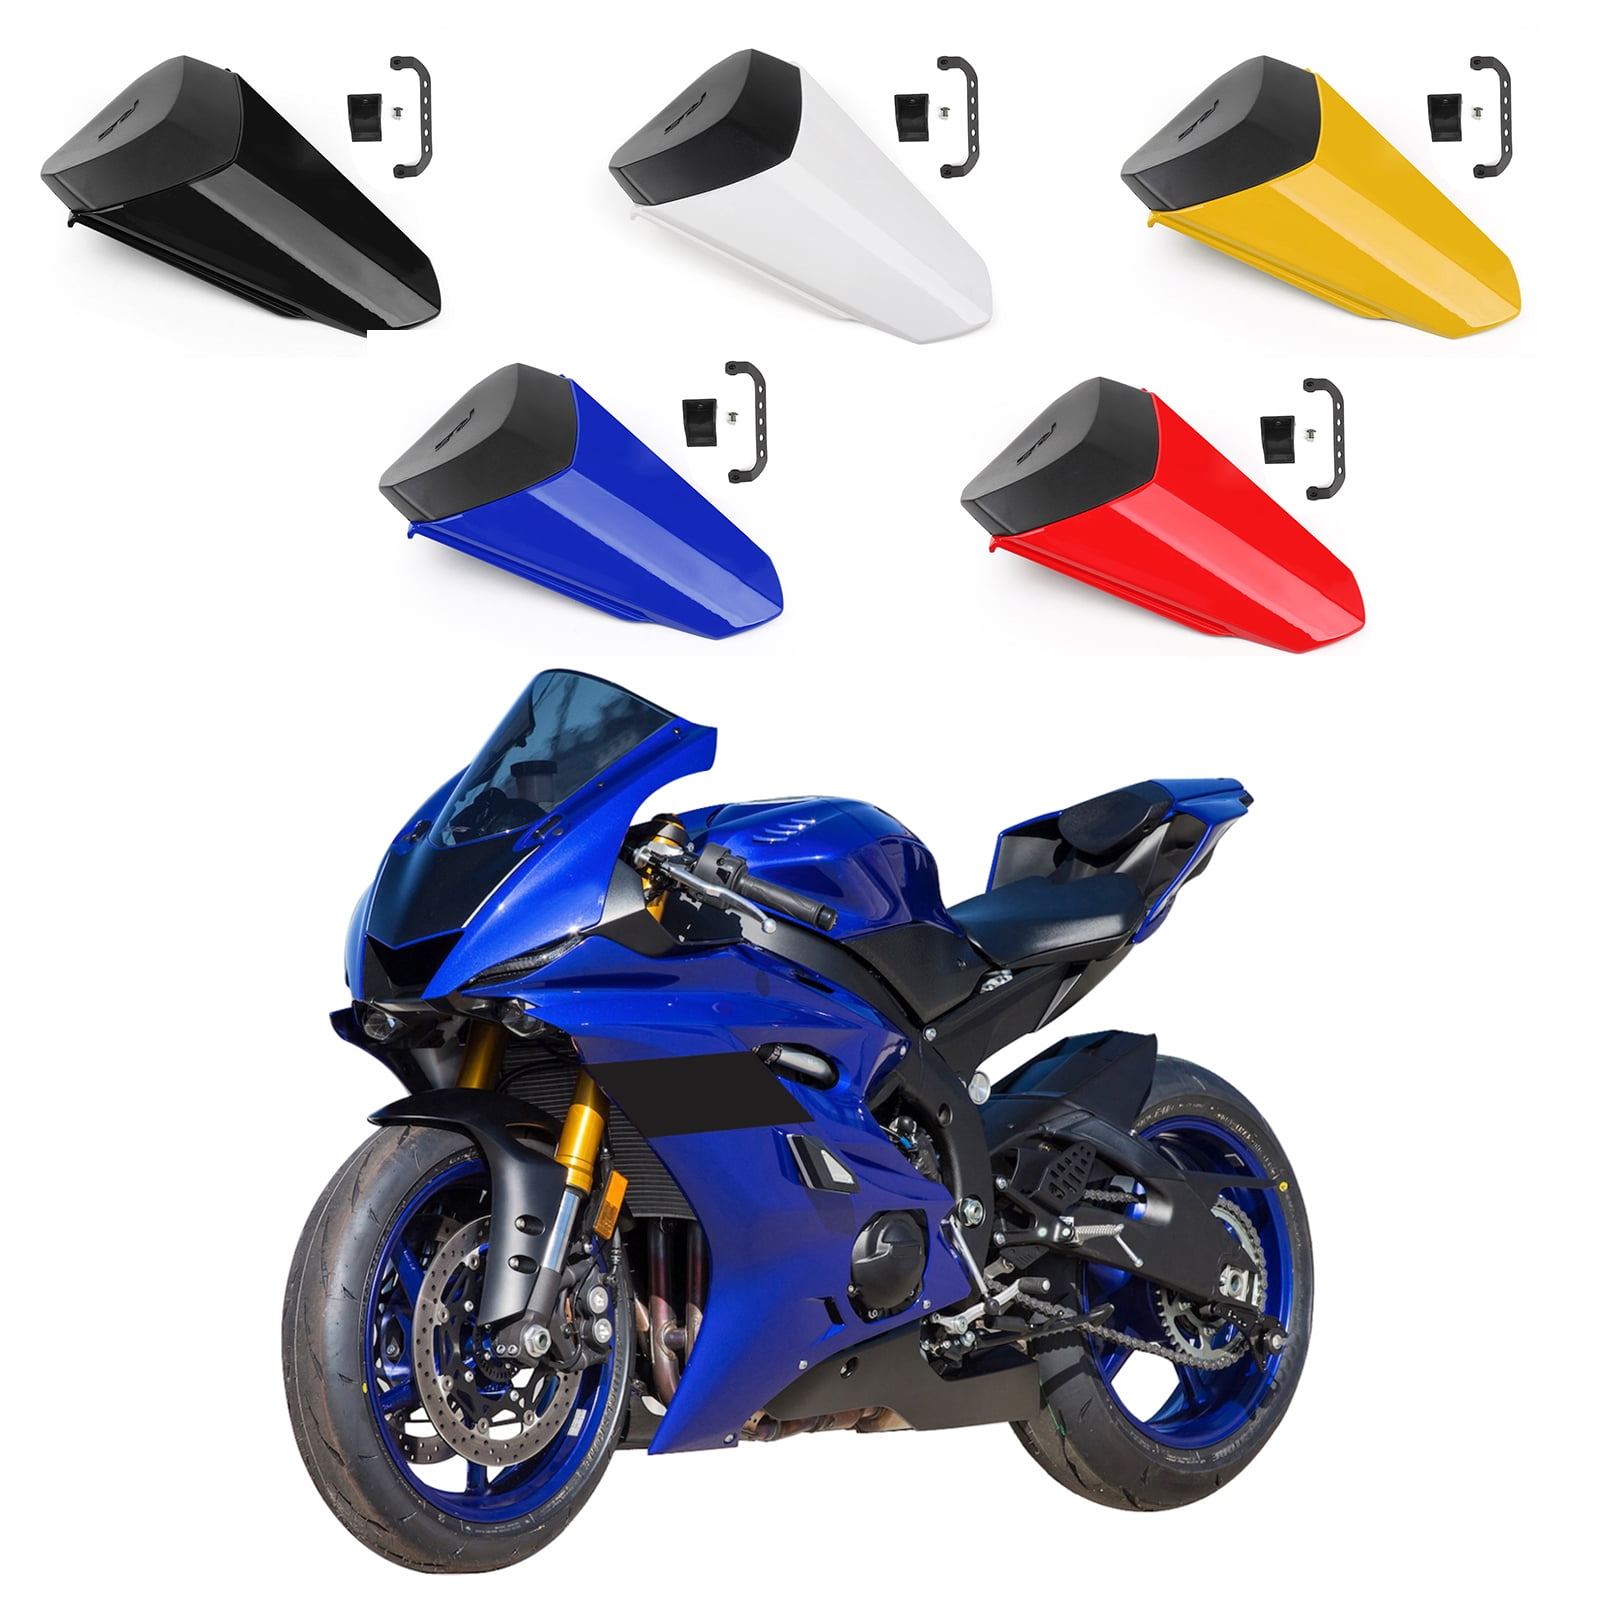 Blue Rear Seat Cover Cowl Faring for YAMAHA YZF R6 06 07 2006-2007 YZFR6 